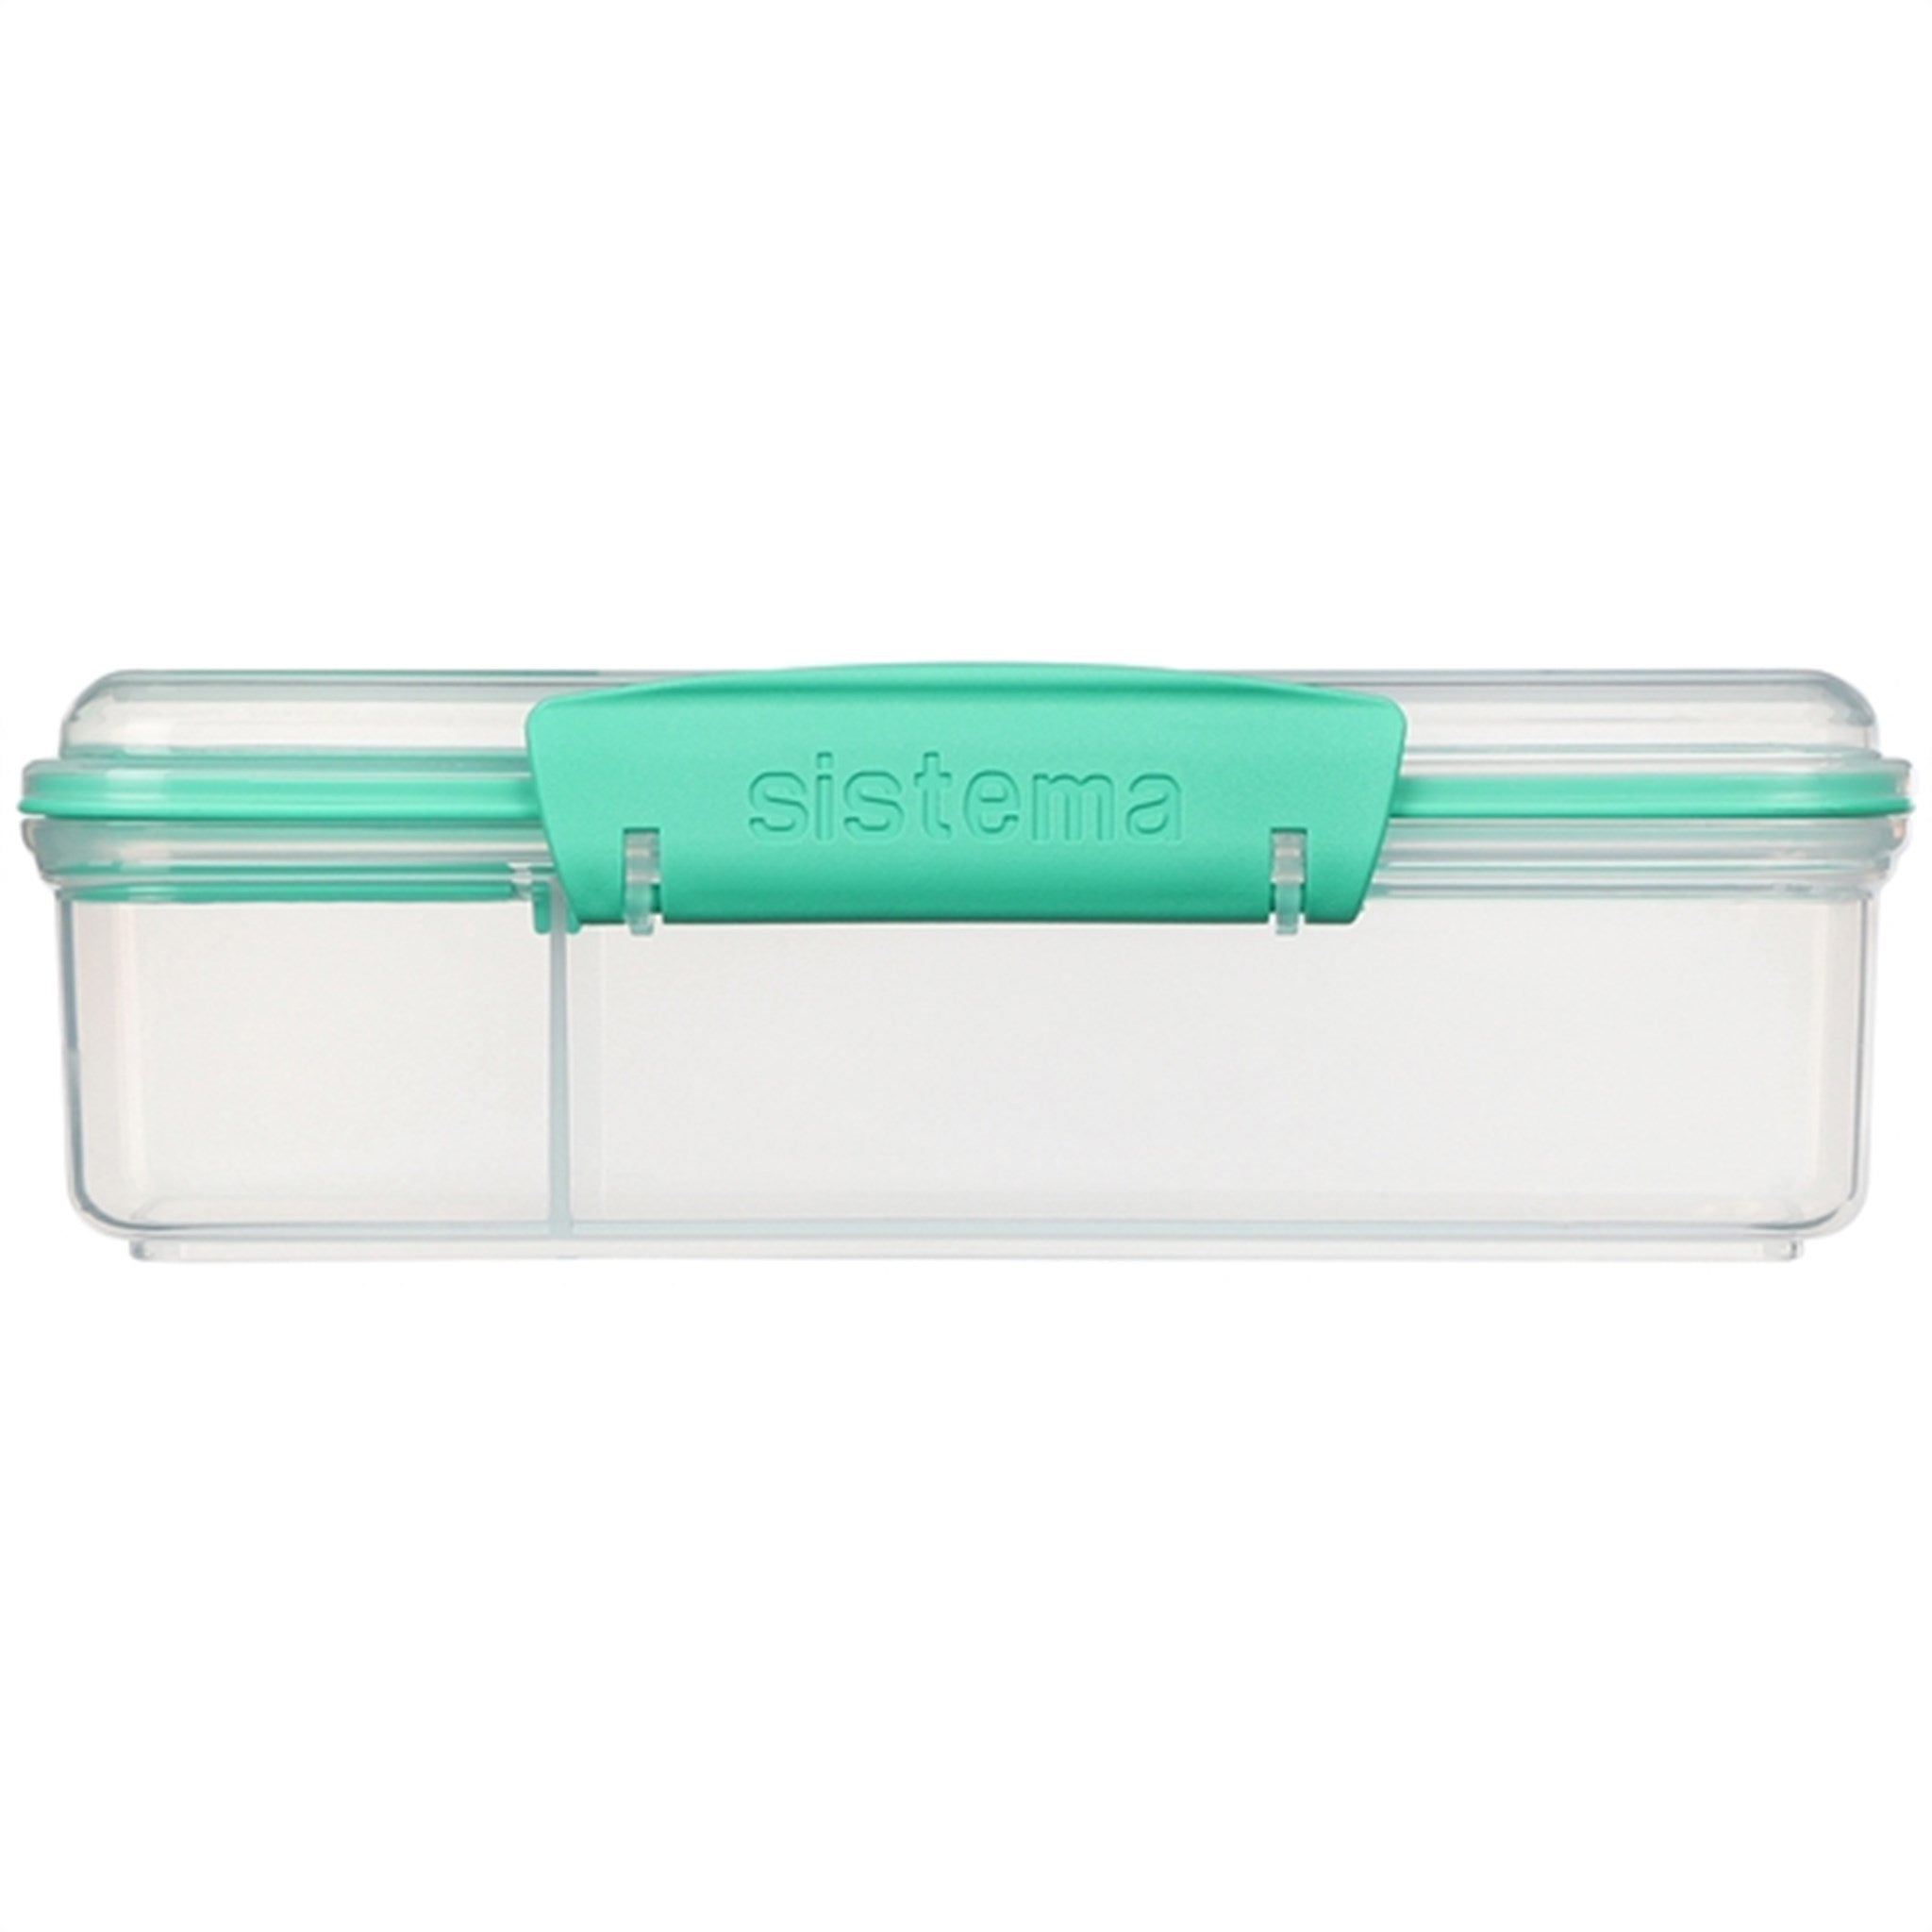 Sistema To Go Snack Attack Lunch Box 410 ml Minty Teal 2